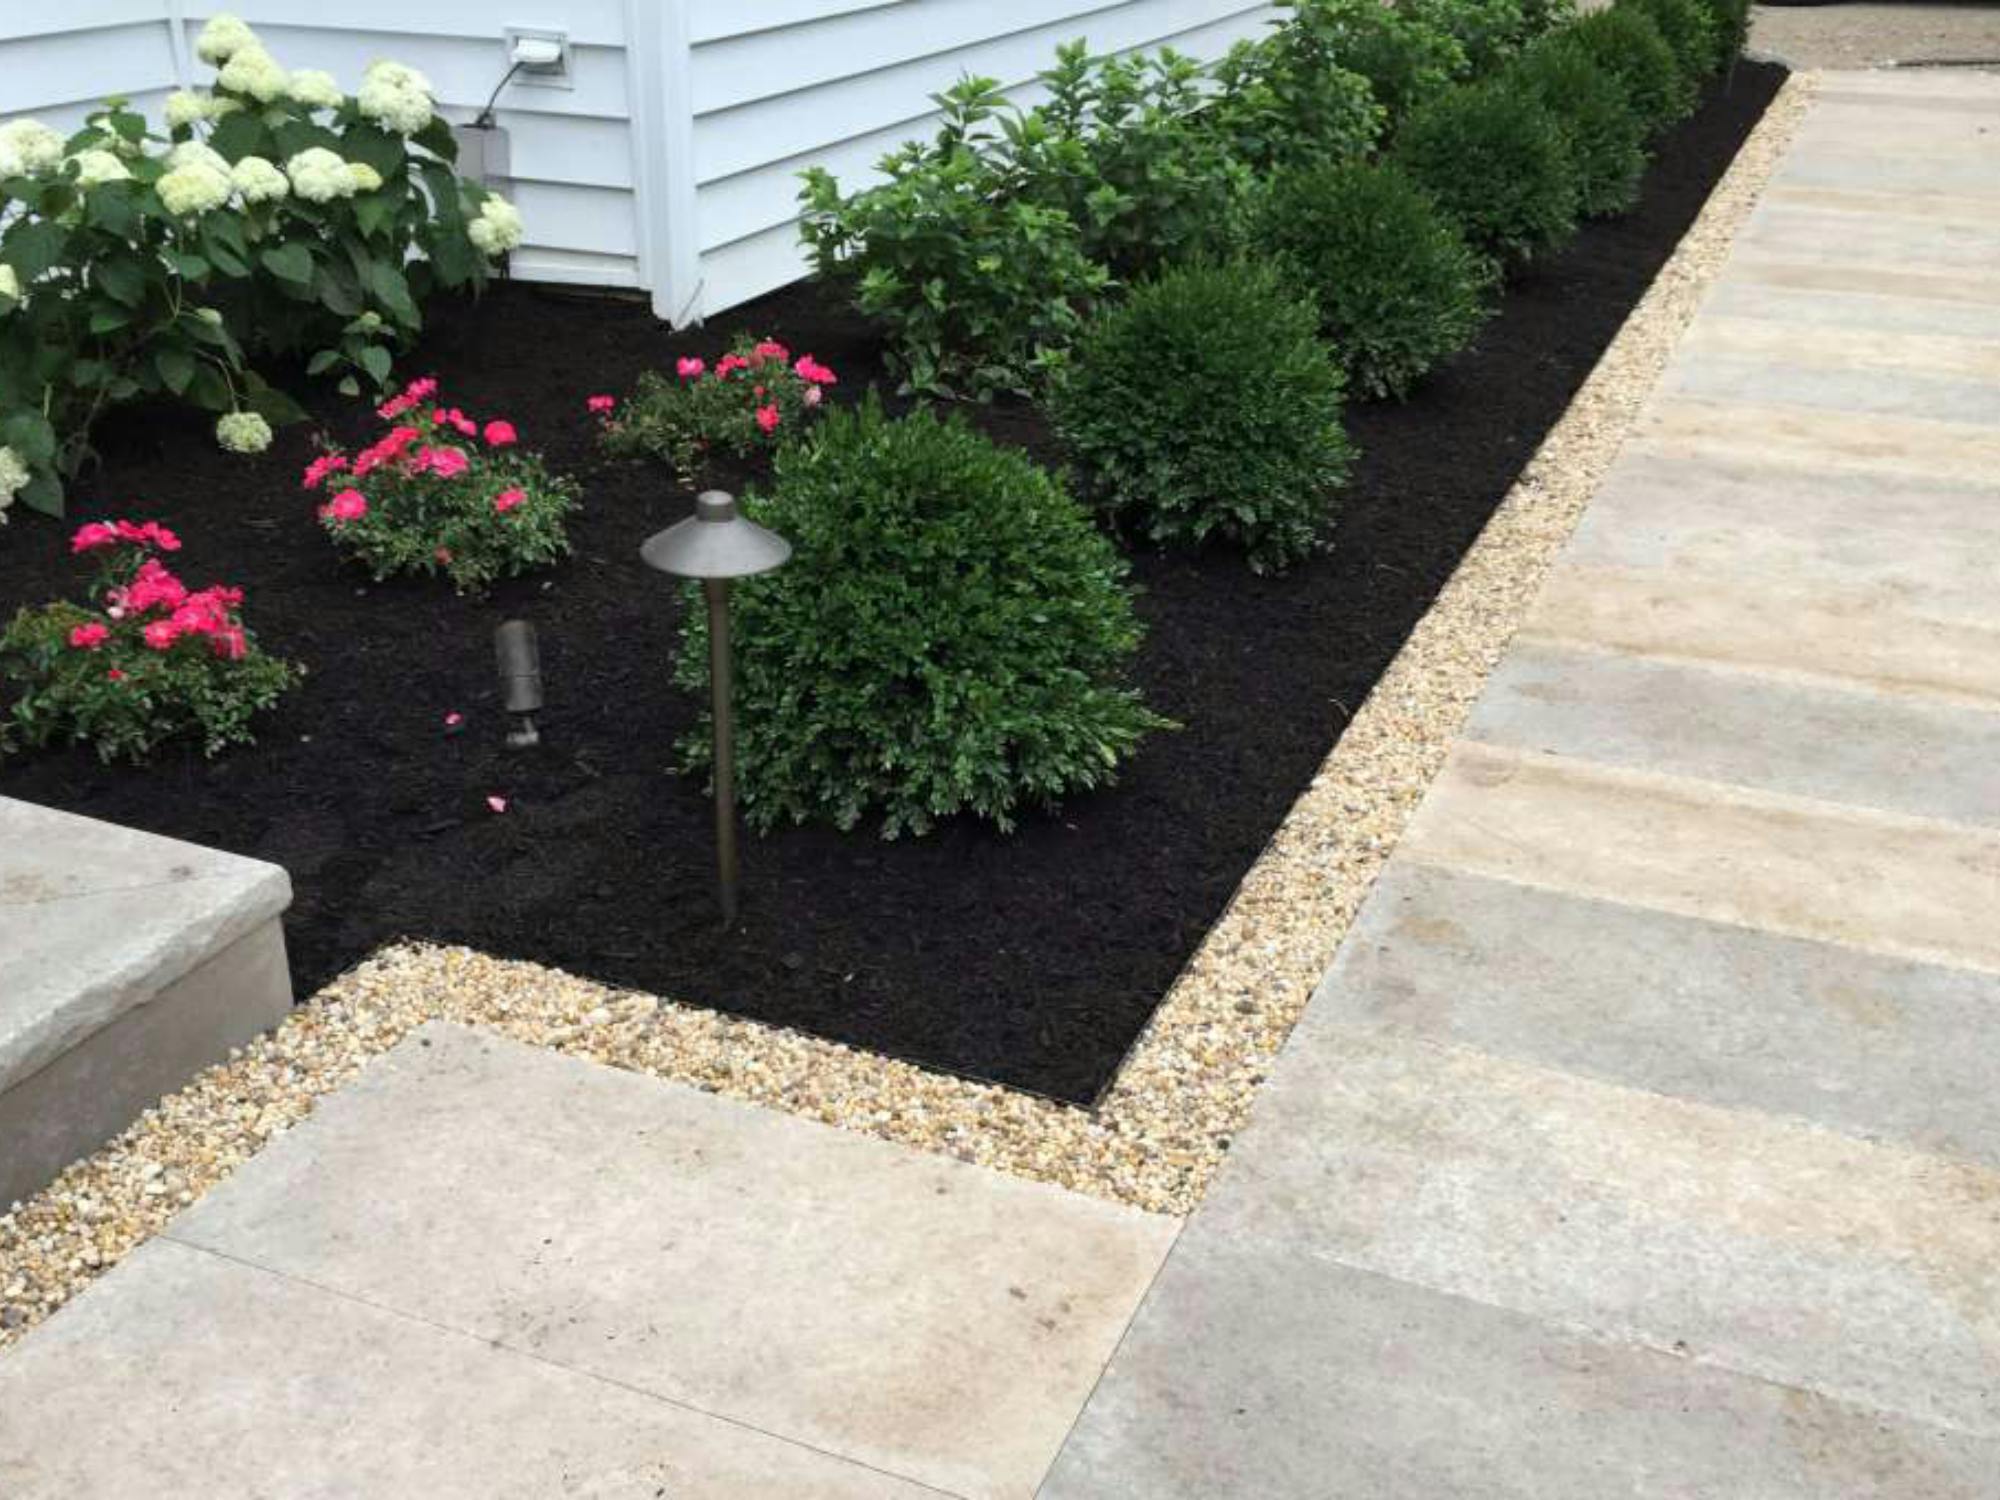 How to Choose the Right Mulch for Your Yard